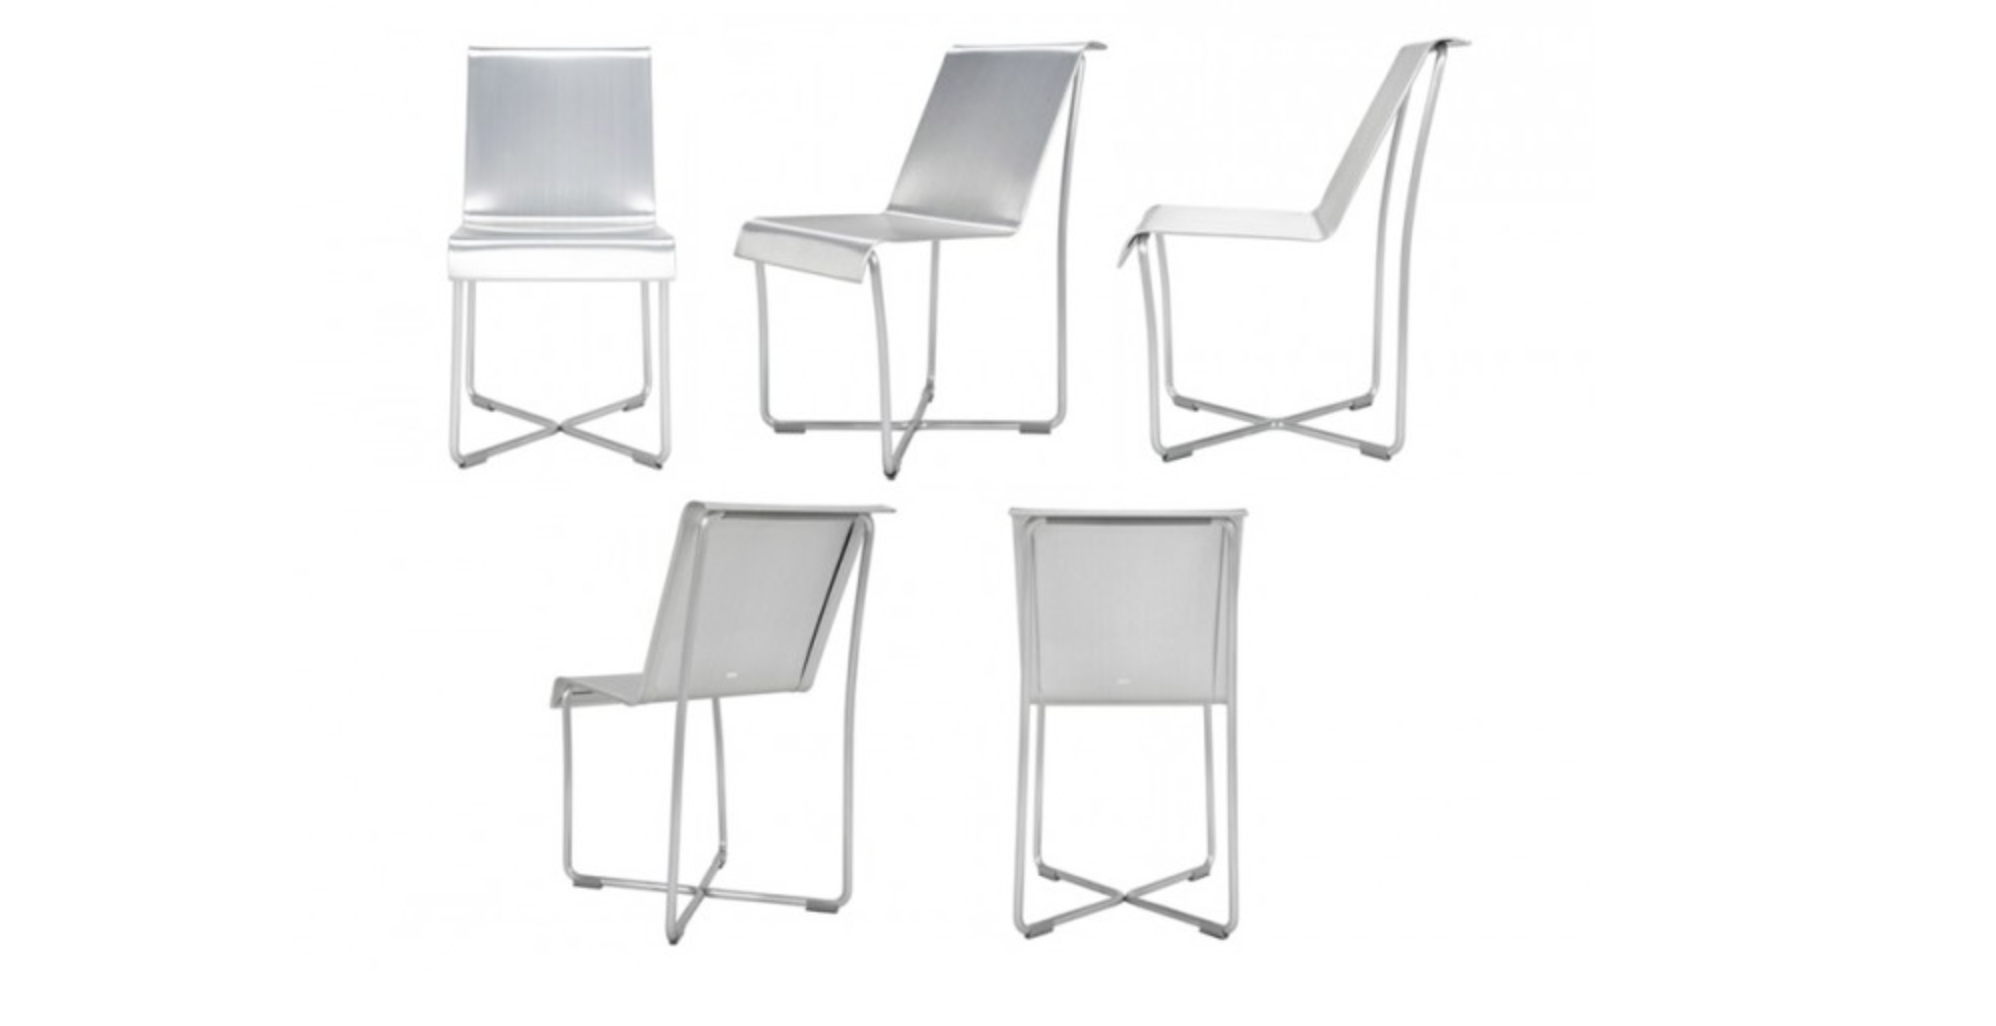 superlight chair BY FRANK GEHRY FOR EMECO